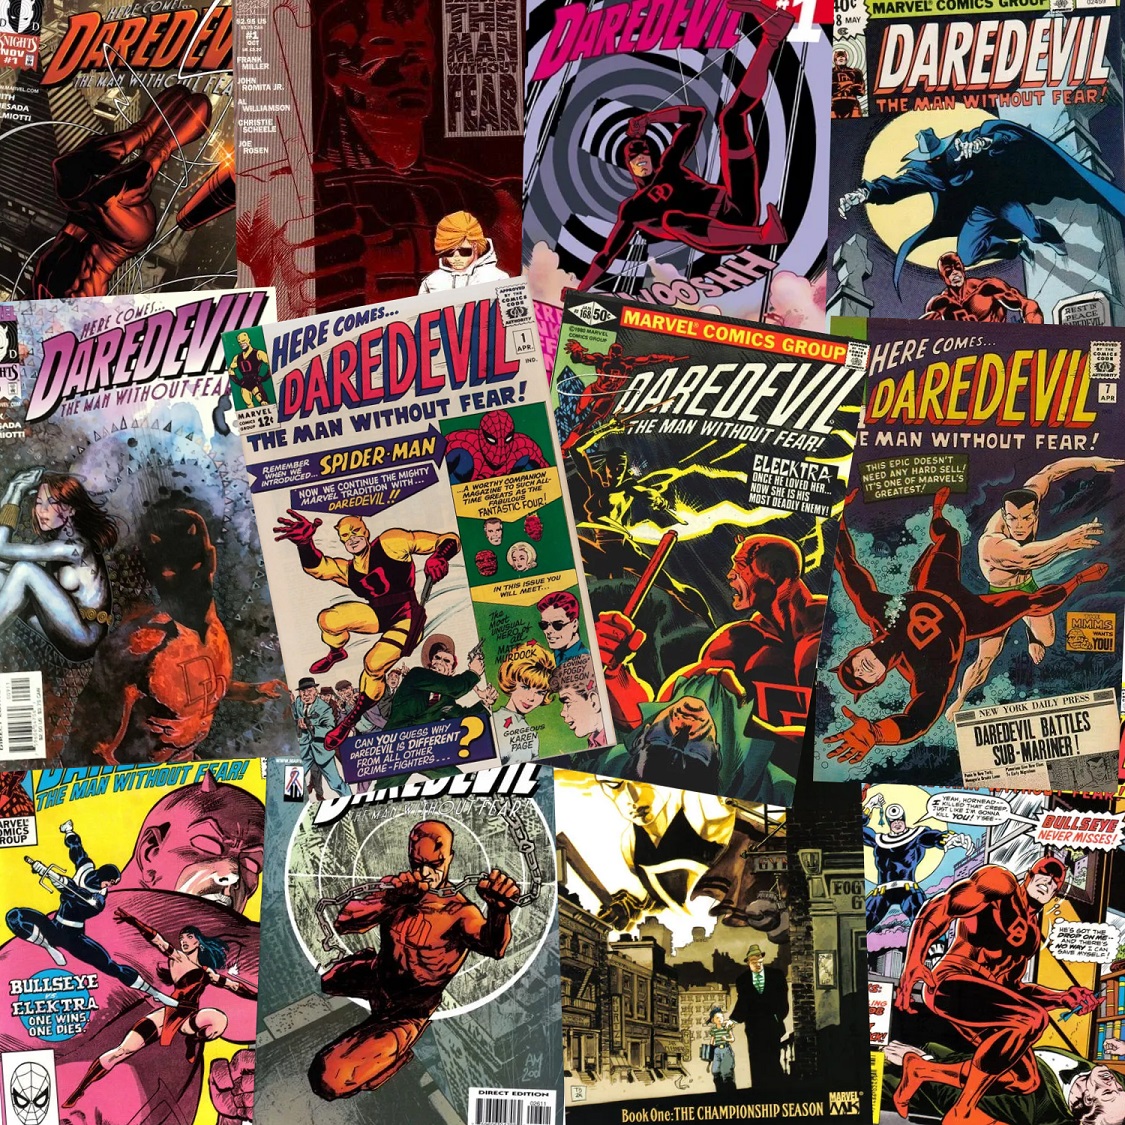 #DYK that April marks 60 years of @Daredevil? What was the 1st comic you bought featuring The Man Without Fear? A copy bought at a local newsstand back in the day? A cover that caught your eye? Share below! #Daredevil #MattMurdock #comics #collector